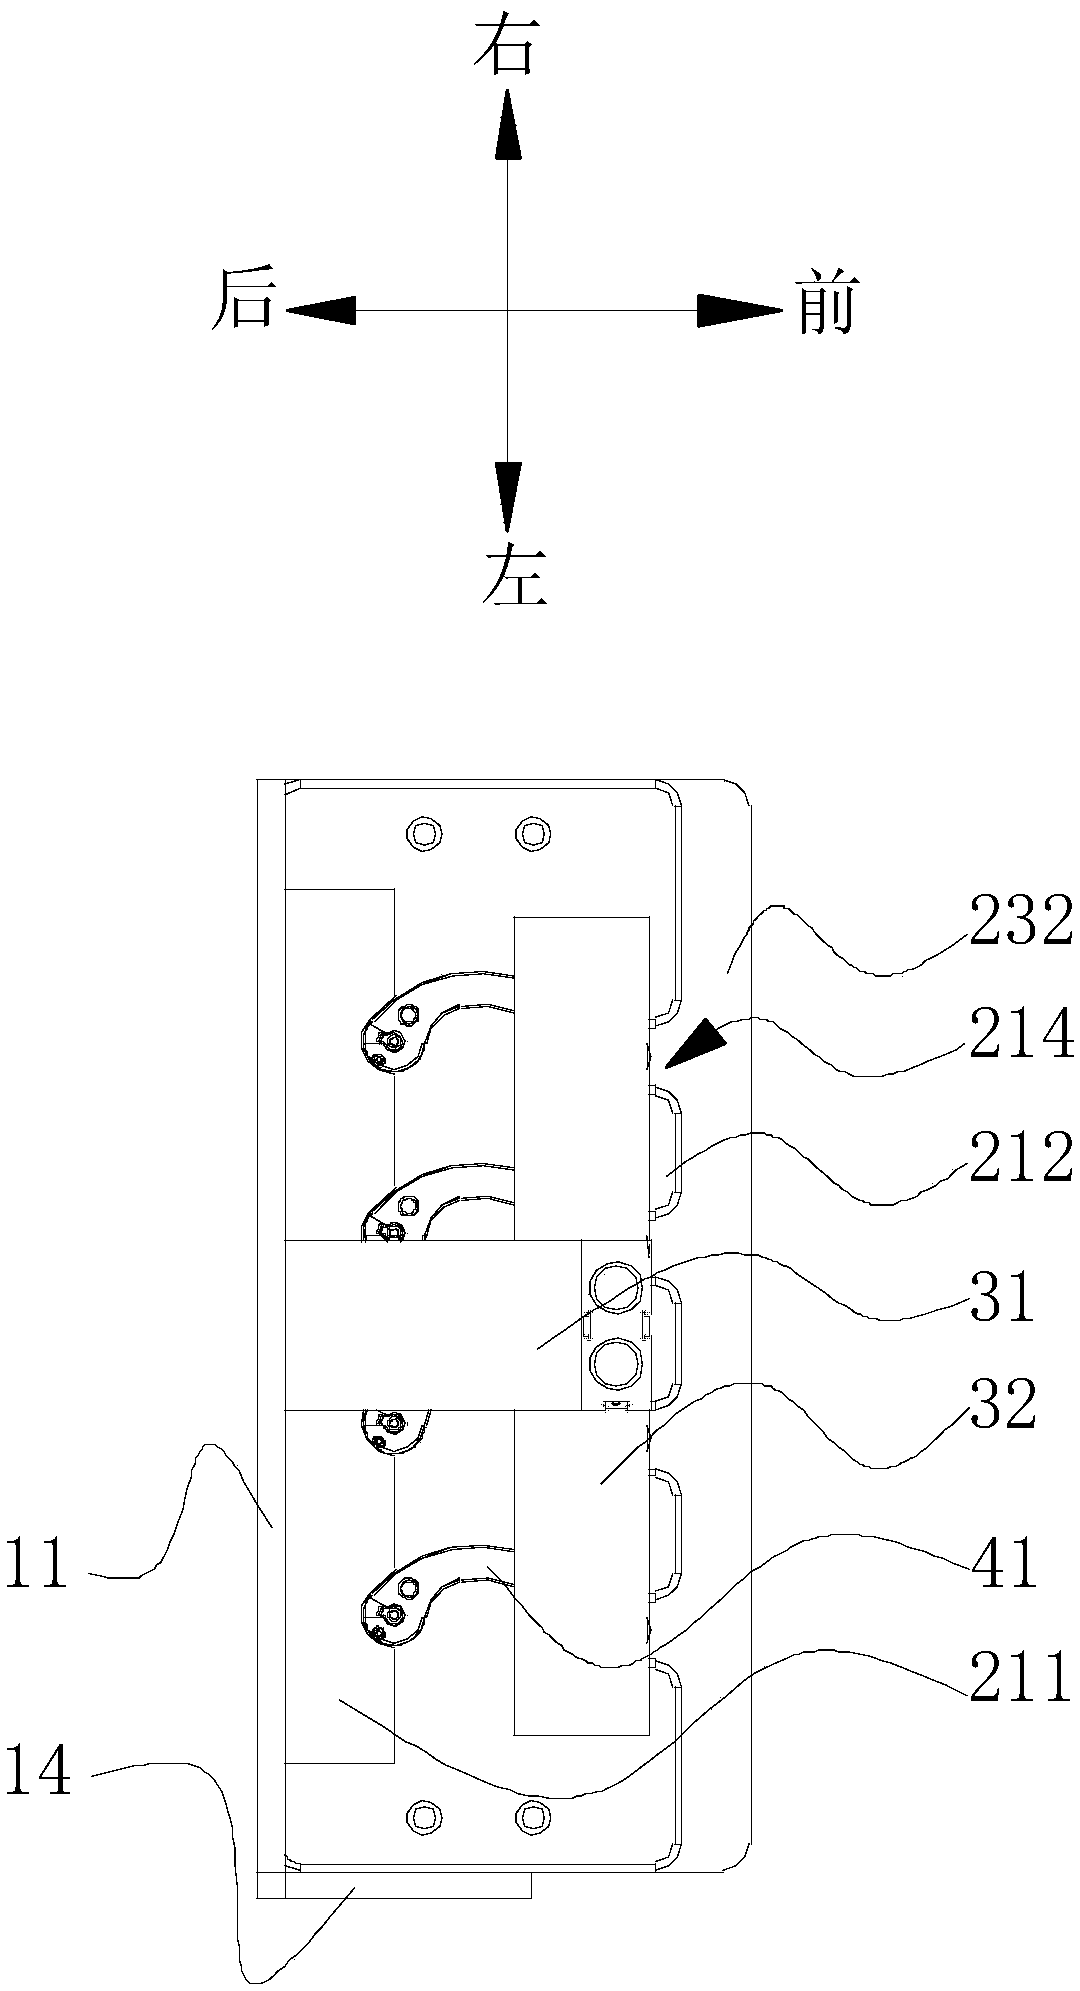 Device for assembling electric heater clothes hangers